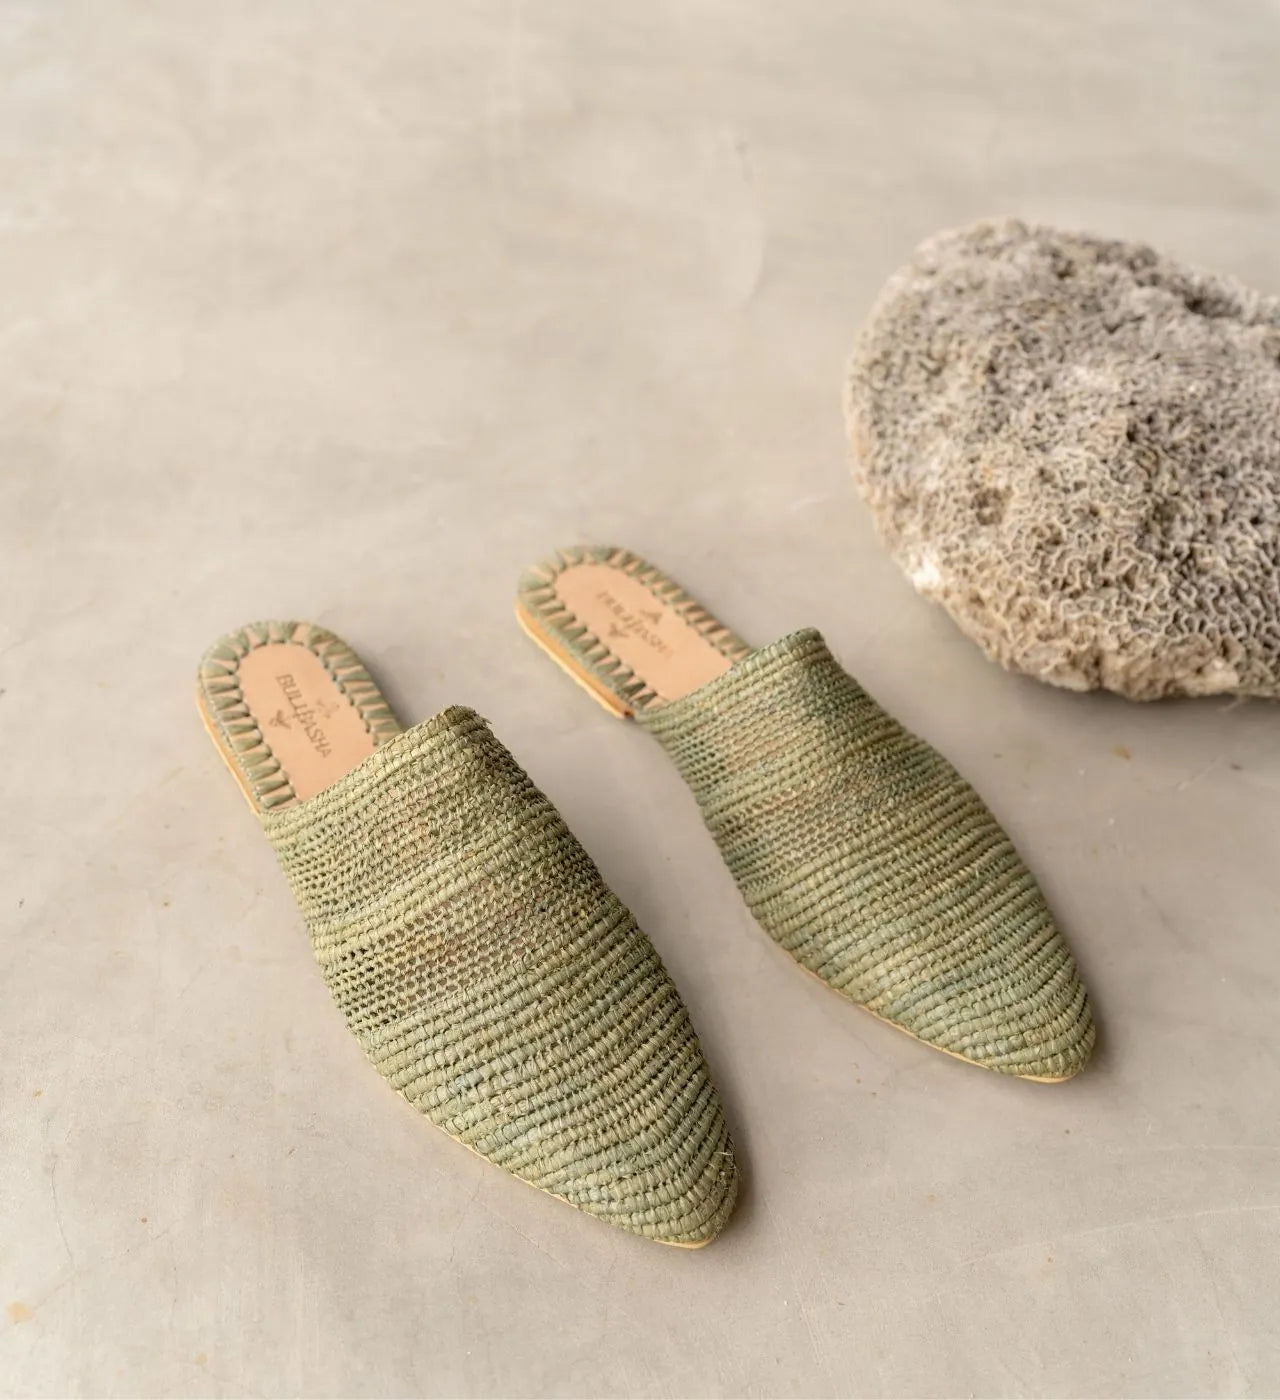 Babouche Tayri Green, sustainable, handmade sandals made from natural materials by Bulibasha